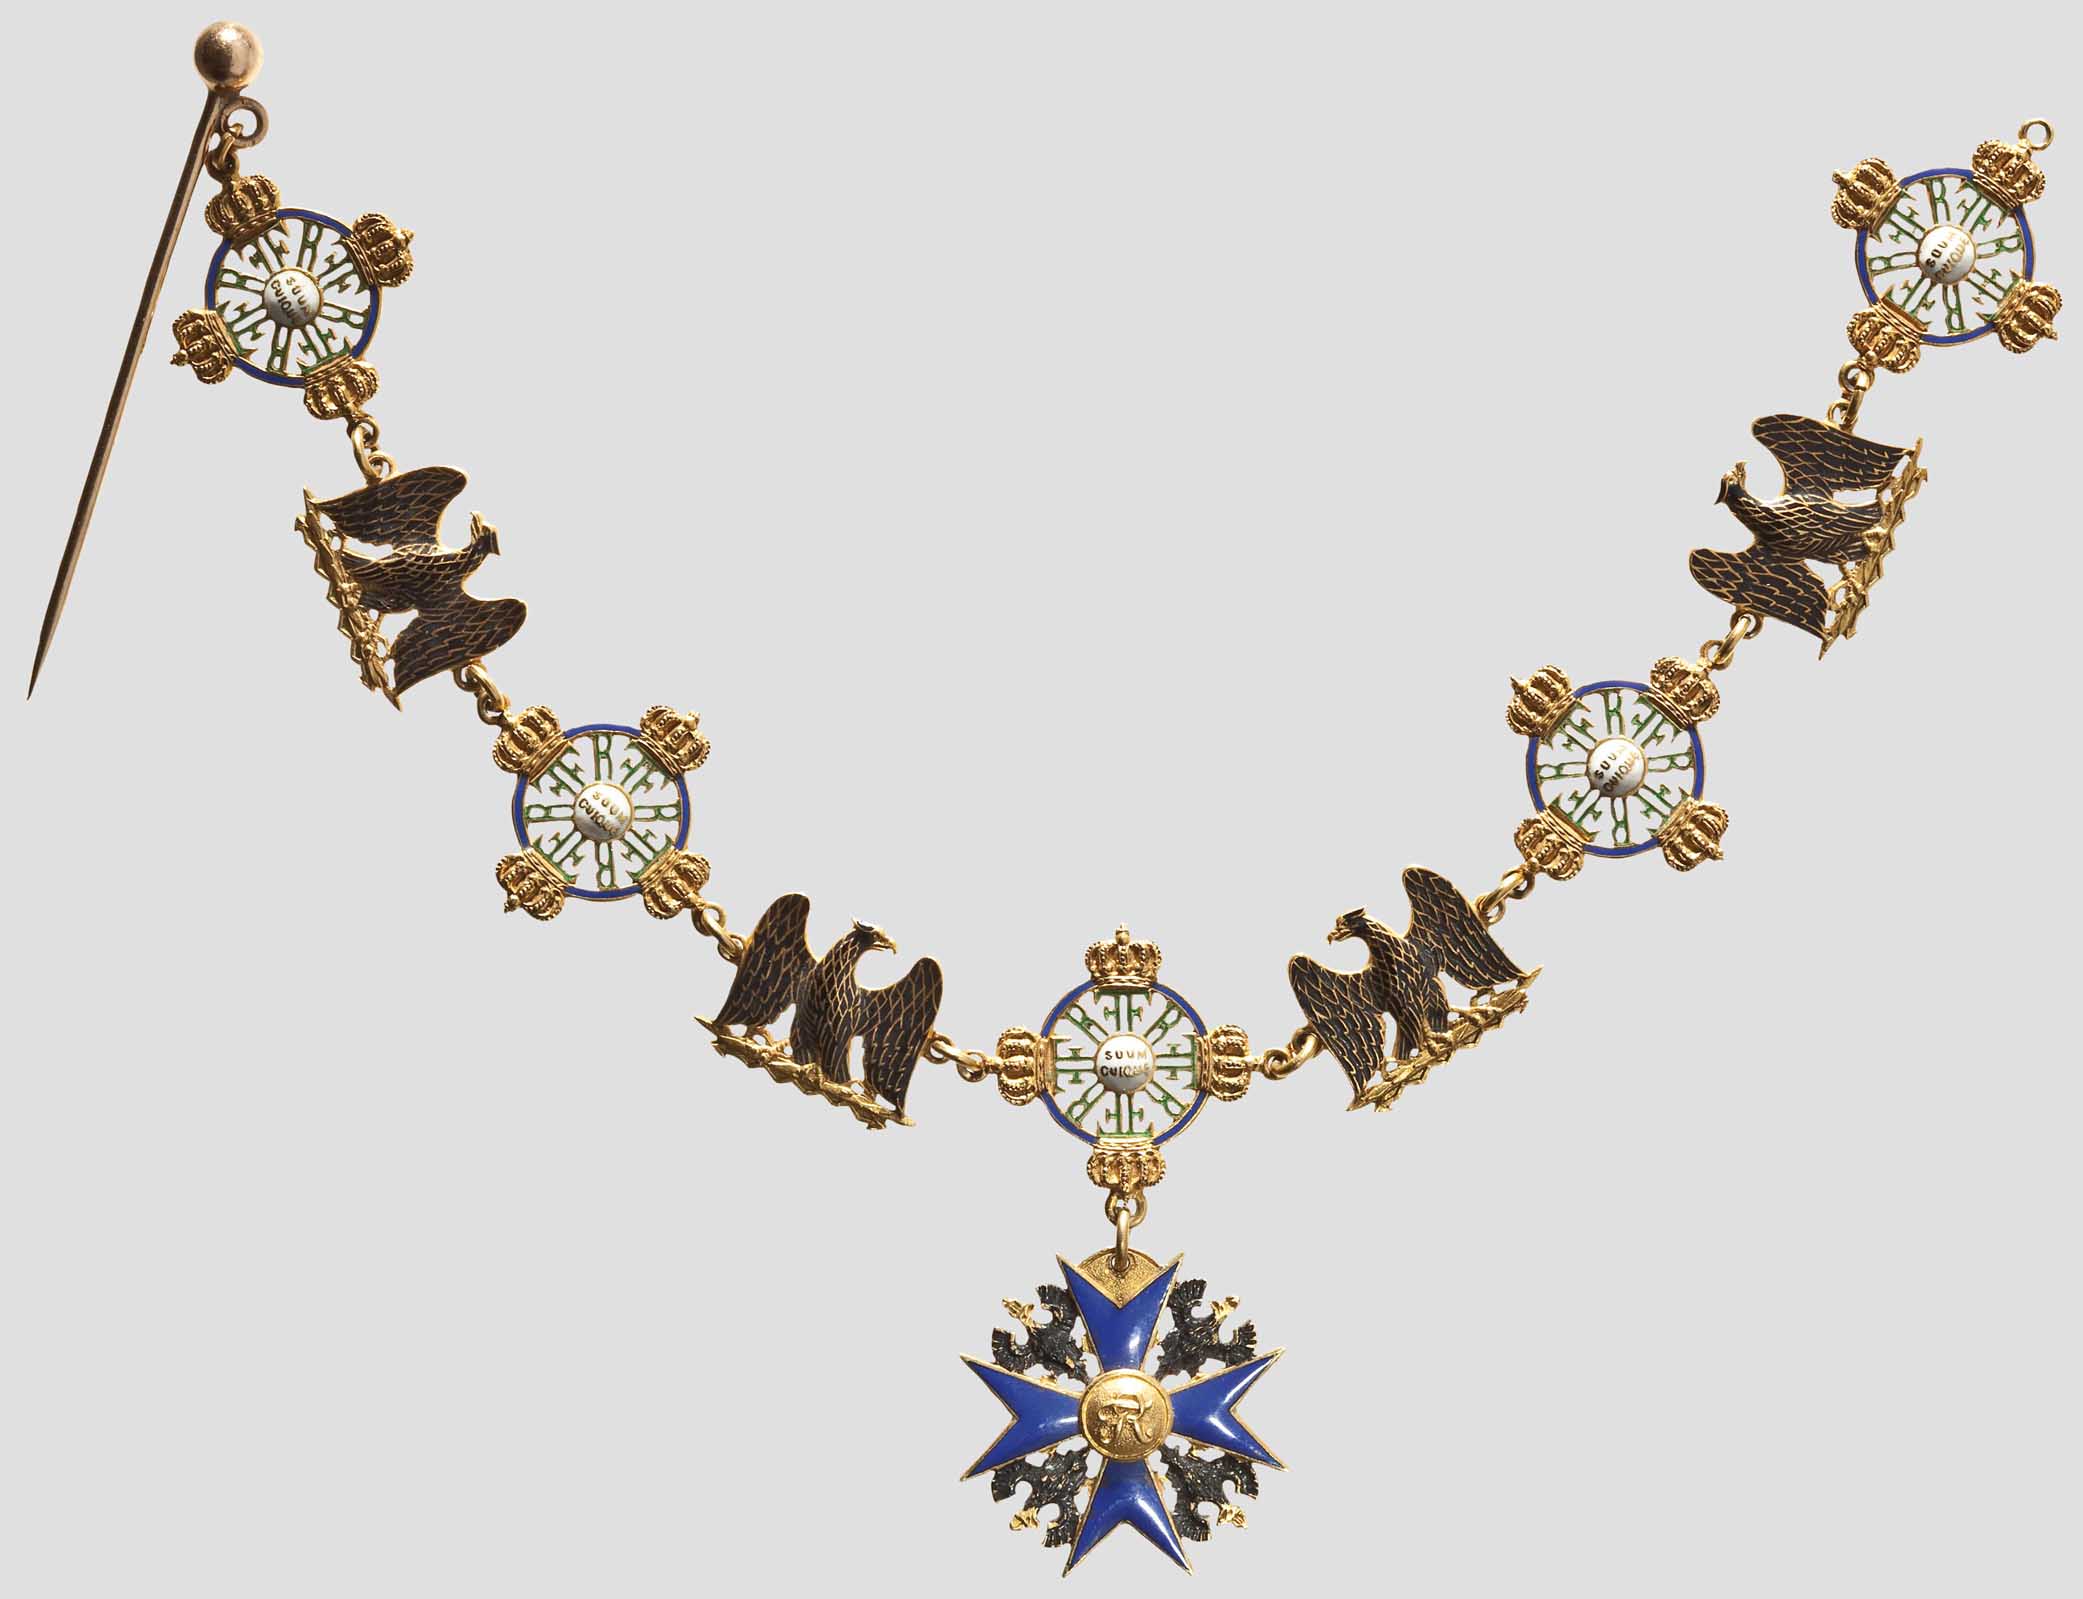 Miniature Chain of the Prussian Order of the Black Eagle.jpg